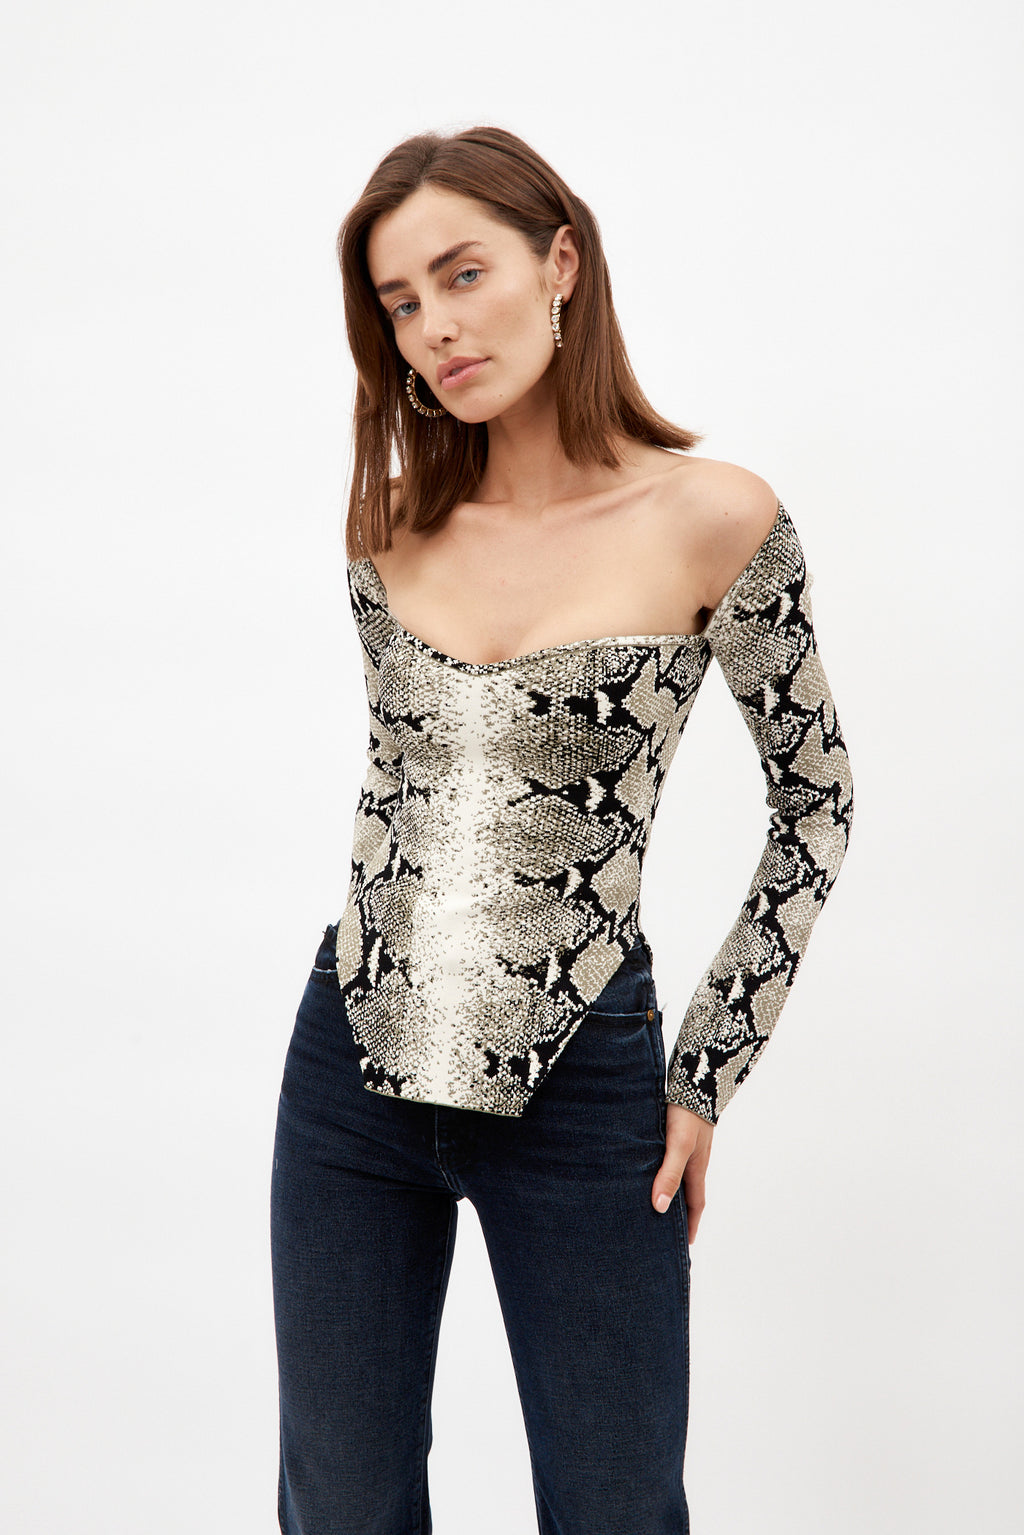 Maddy Roccia Bustier Long Sleeve Top